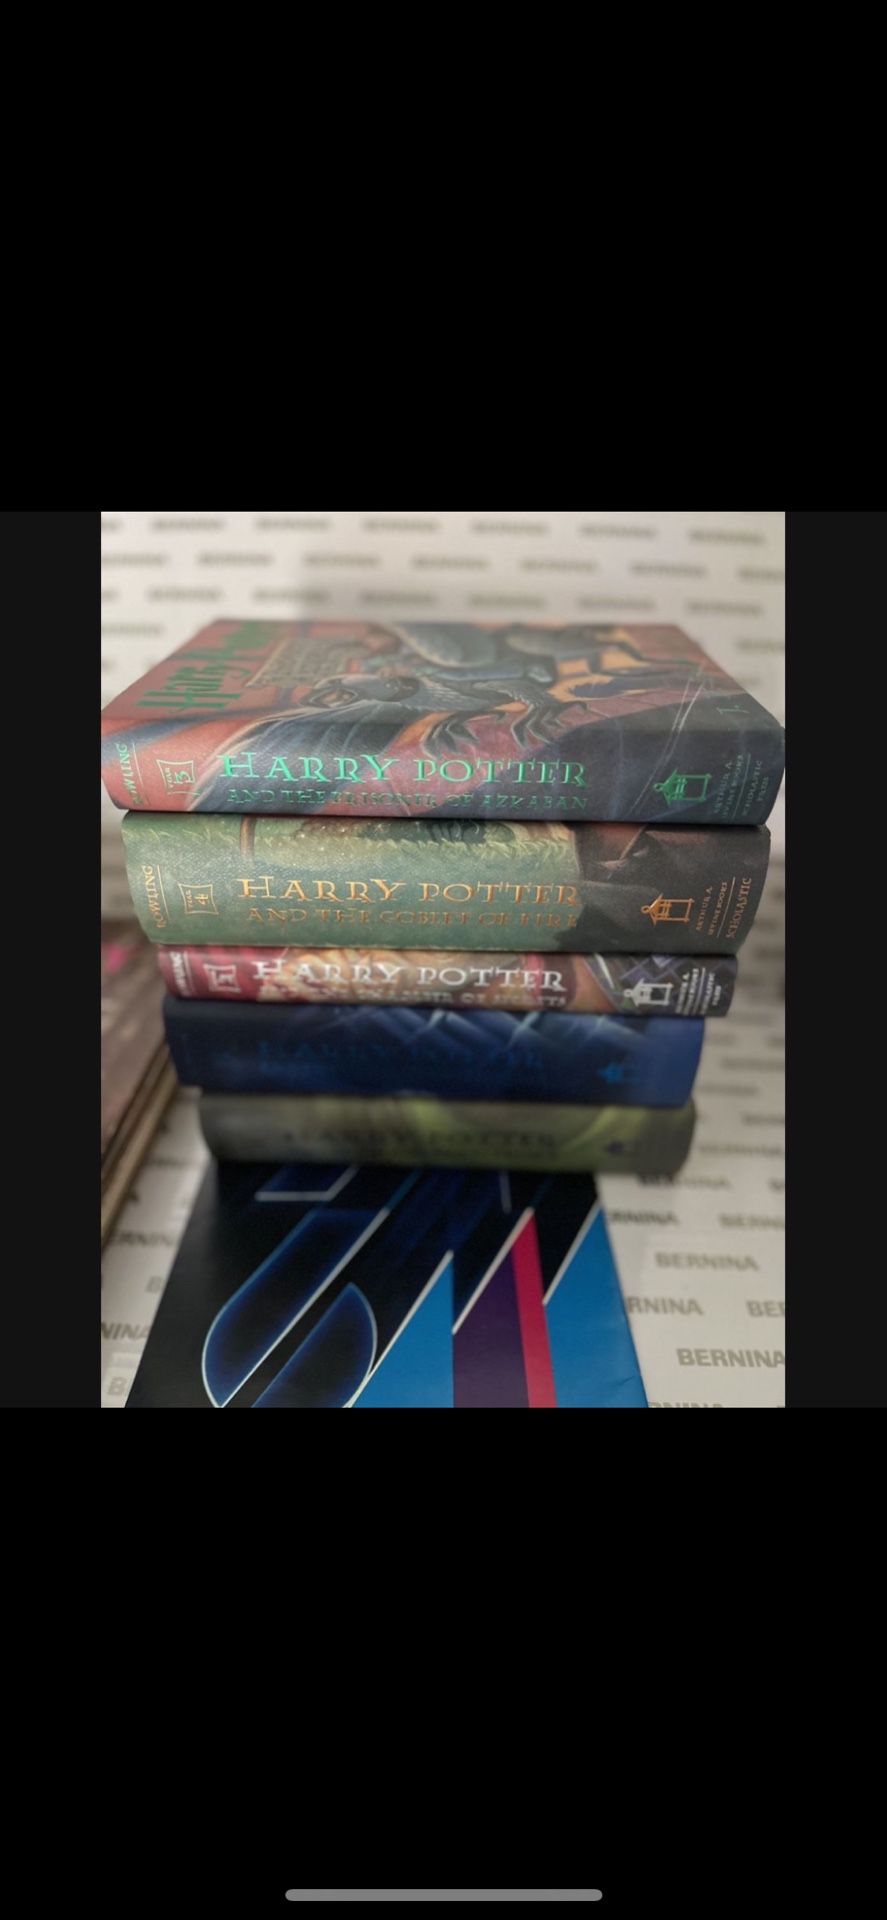 Harry Potter books first editions. Must buy all books.